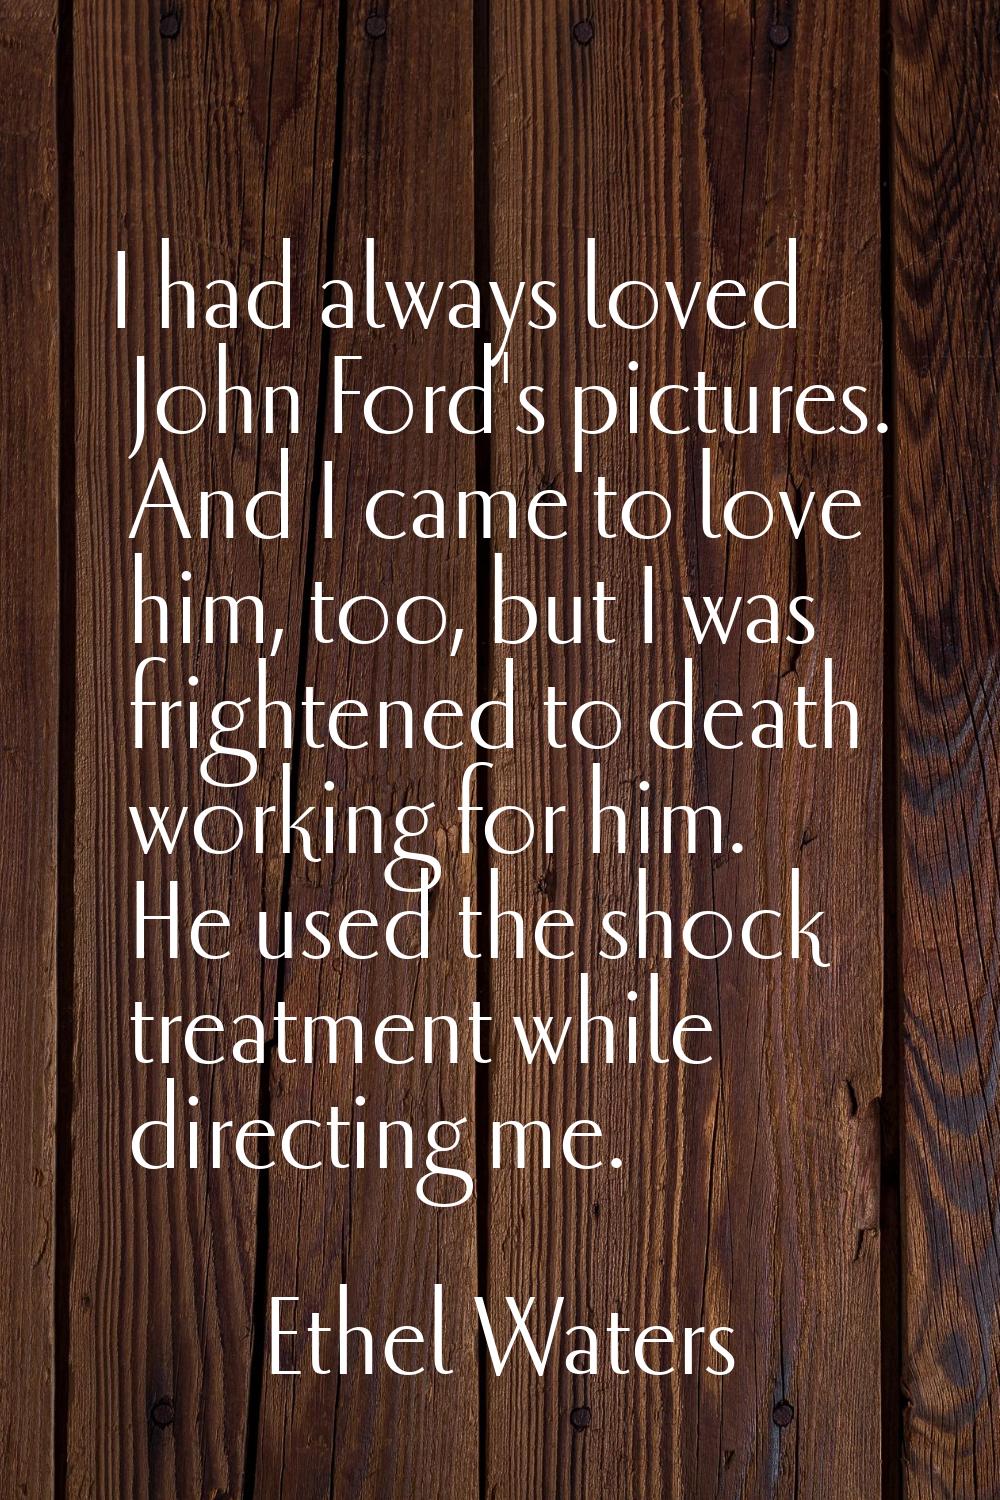 I had always loved John Ford's pictures. And I came to love him, too, but I was frightened to death